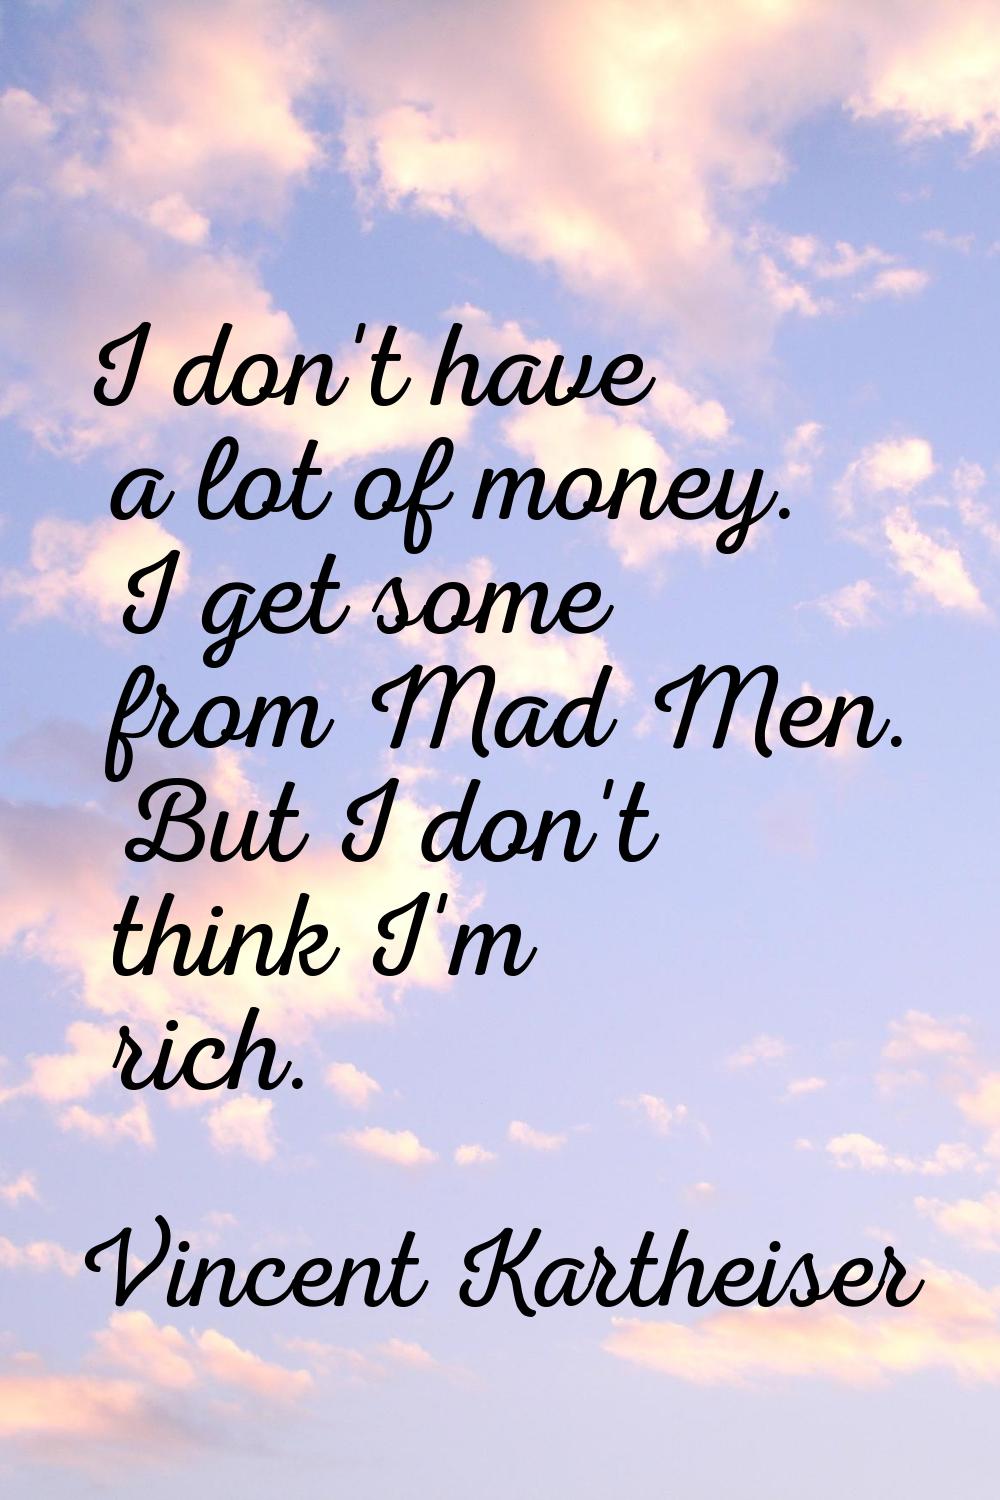 I don't have a lot of money. I get some from Mad Men. But I don't think I'm rich.